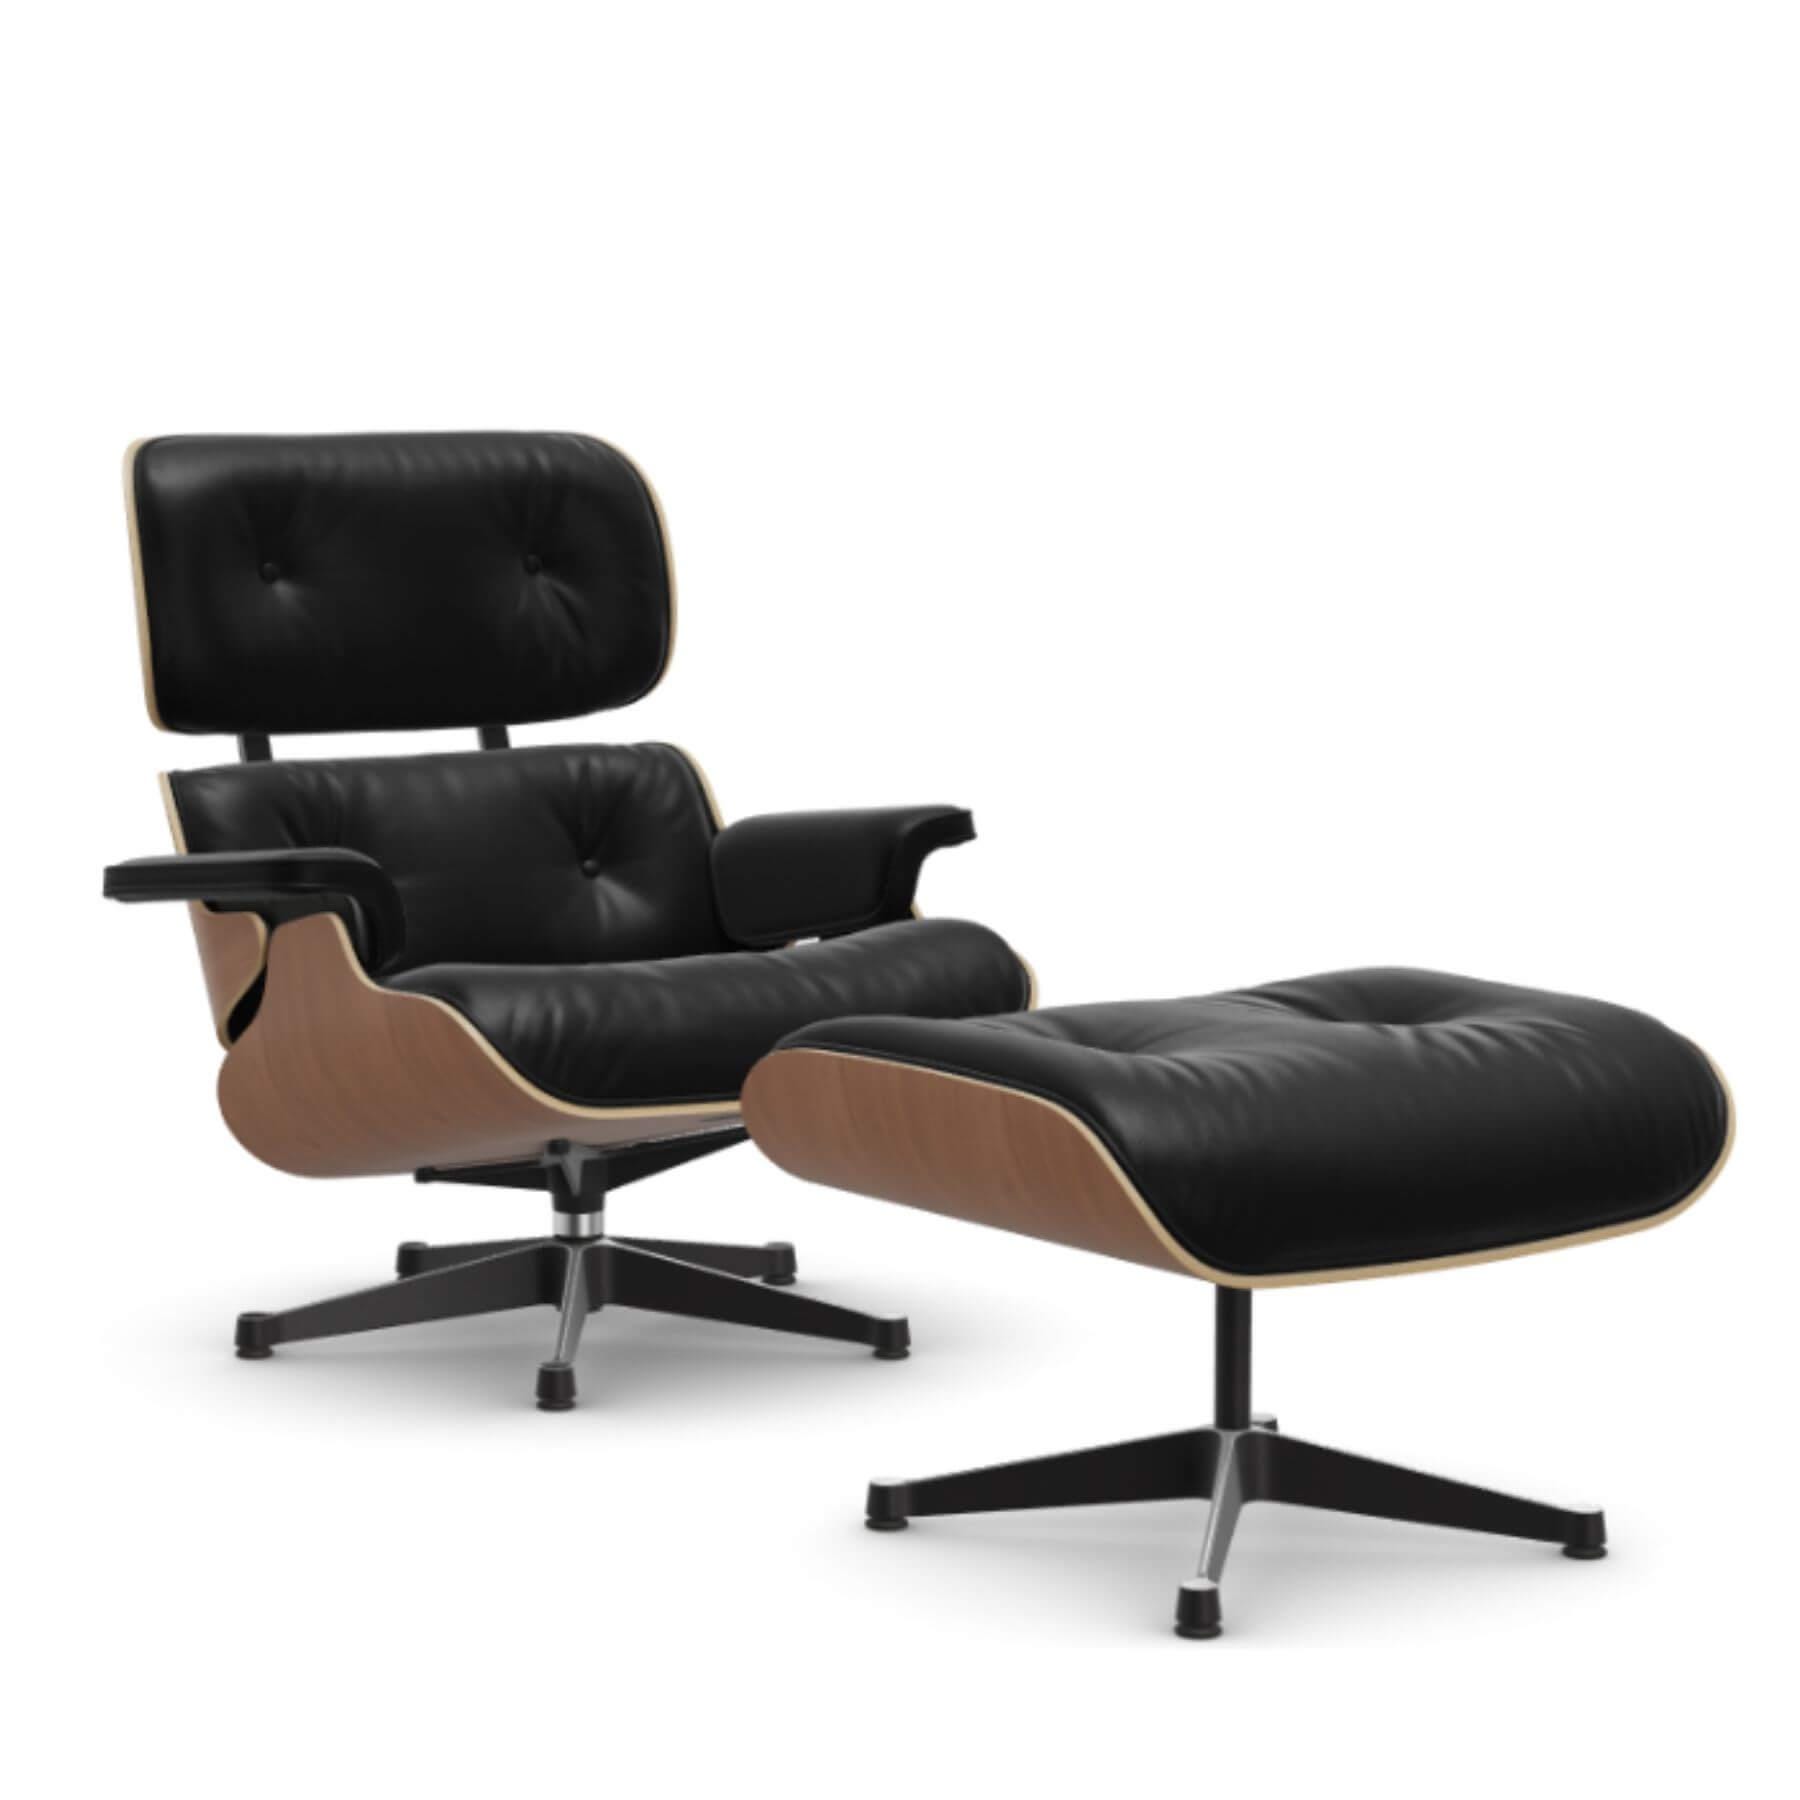 Vitra Eames Lounge Chair American Cherry Leather Natural F Nero Polished Black With Ottoman Light Wood Designer Furniture From Holloways Of Ludlow